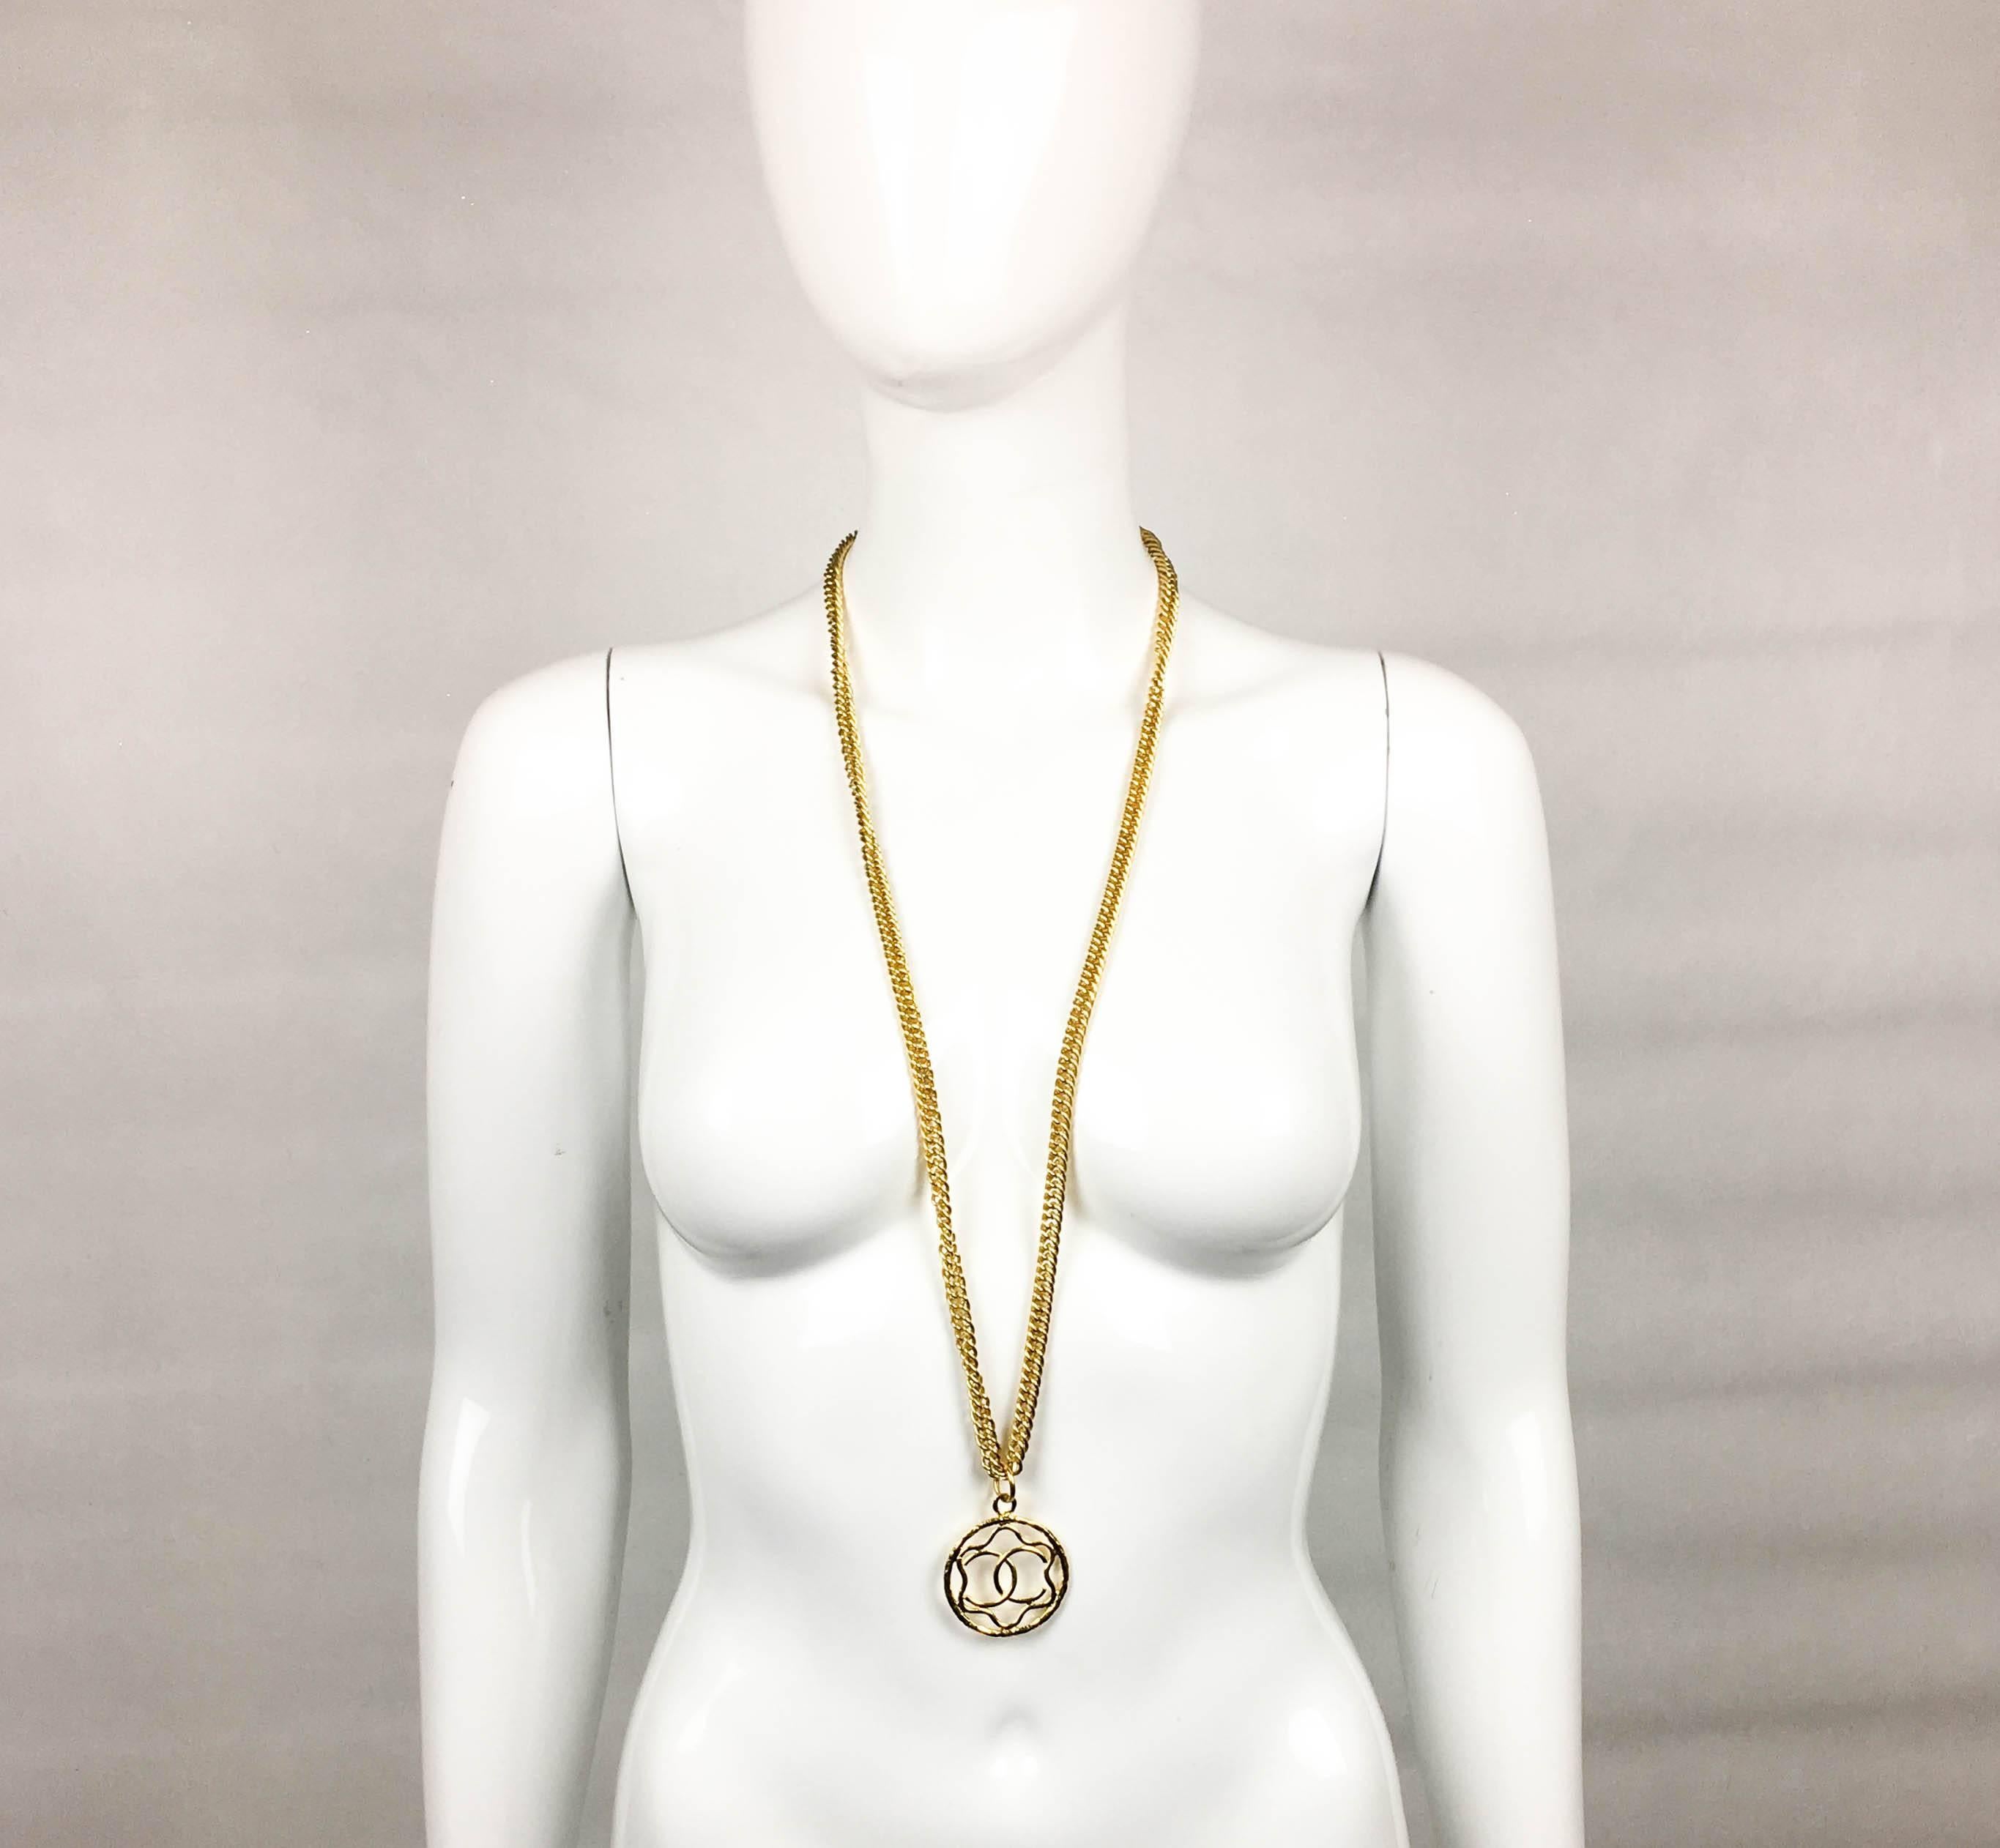 Vintage Chanel Gilt Logo Medallion Pendant Long Chain Necklace. Made in gilt metal, this necklace by Chanel dates from the 1980’s. It comprises of a long gilt chain with a medallion-style ‘CC’ logo pendant. A fashion statement from the iconic House